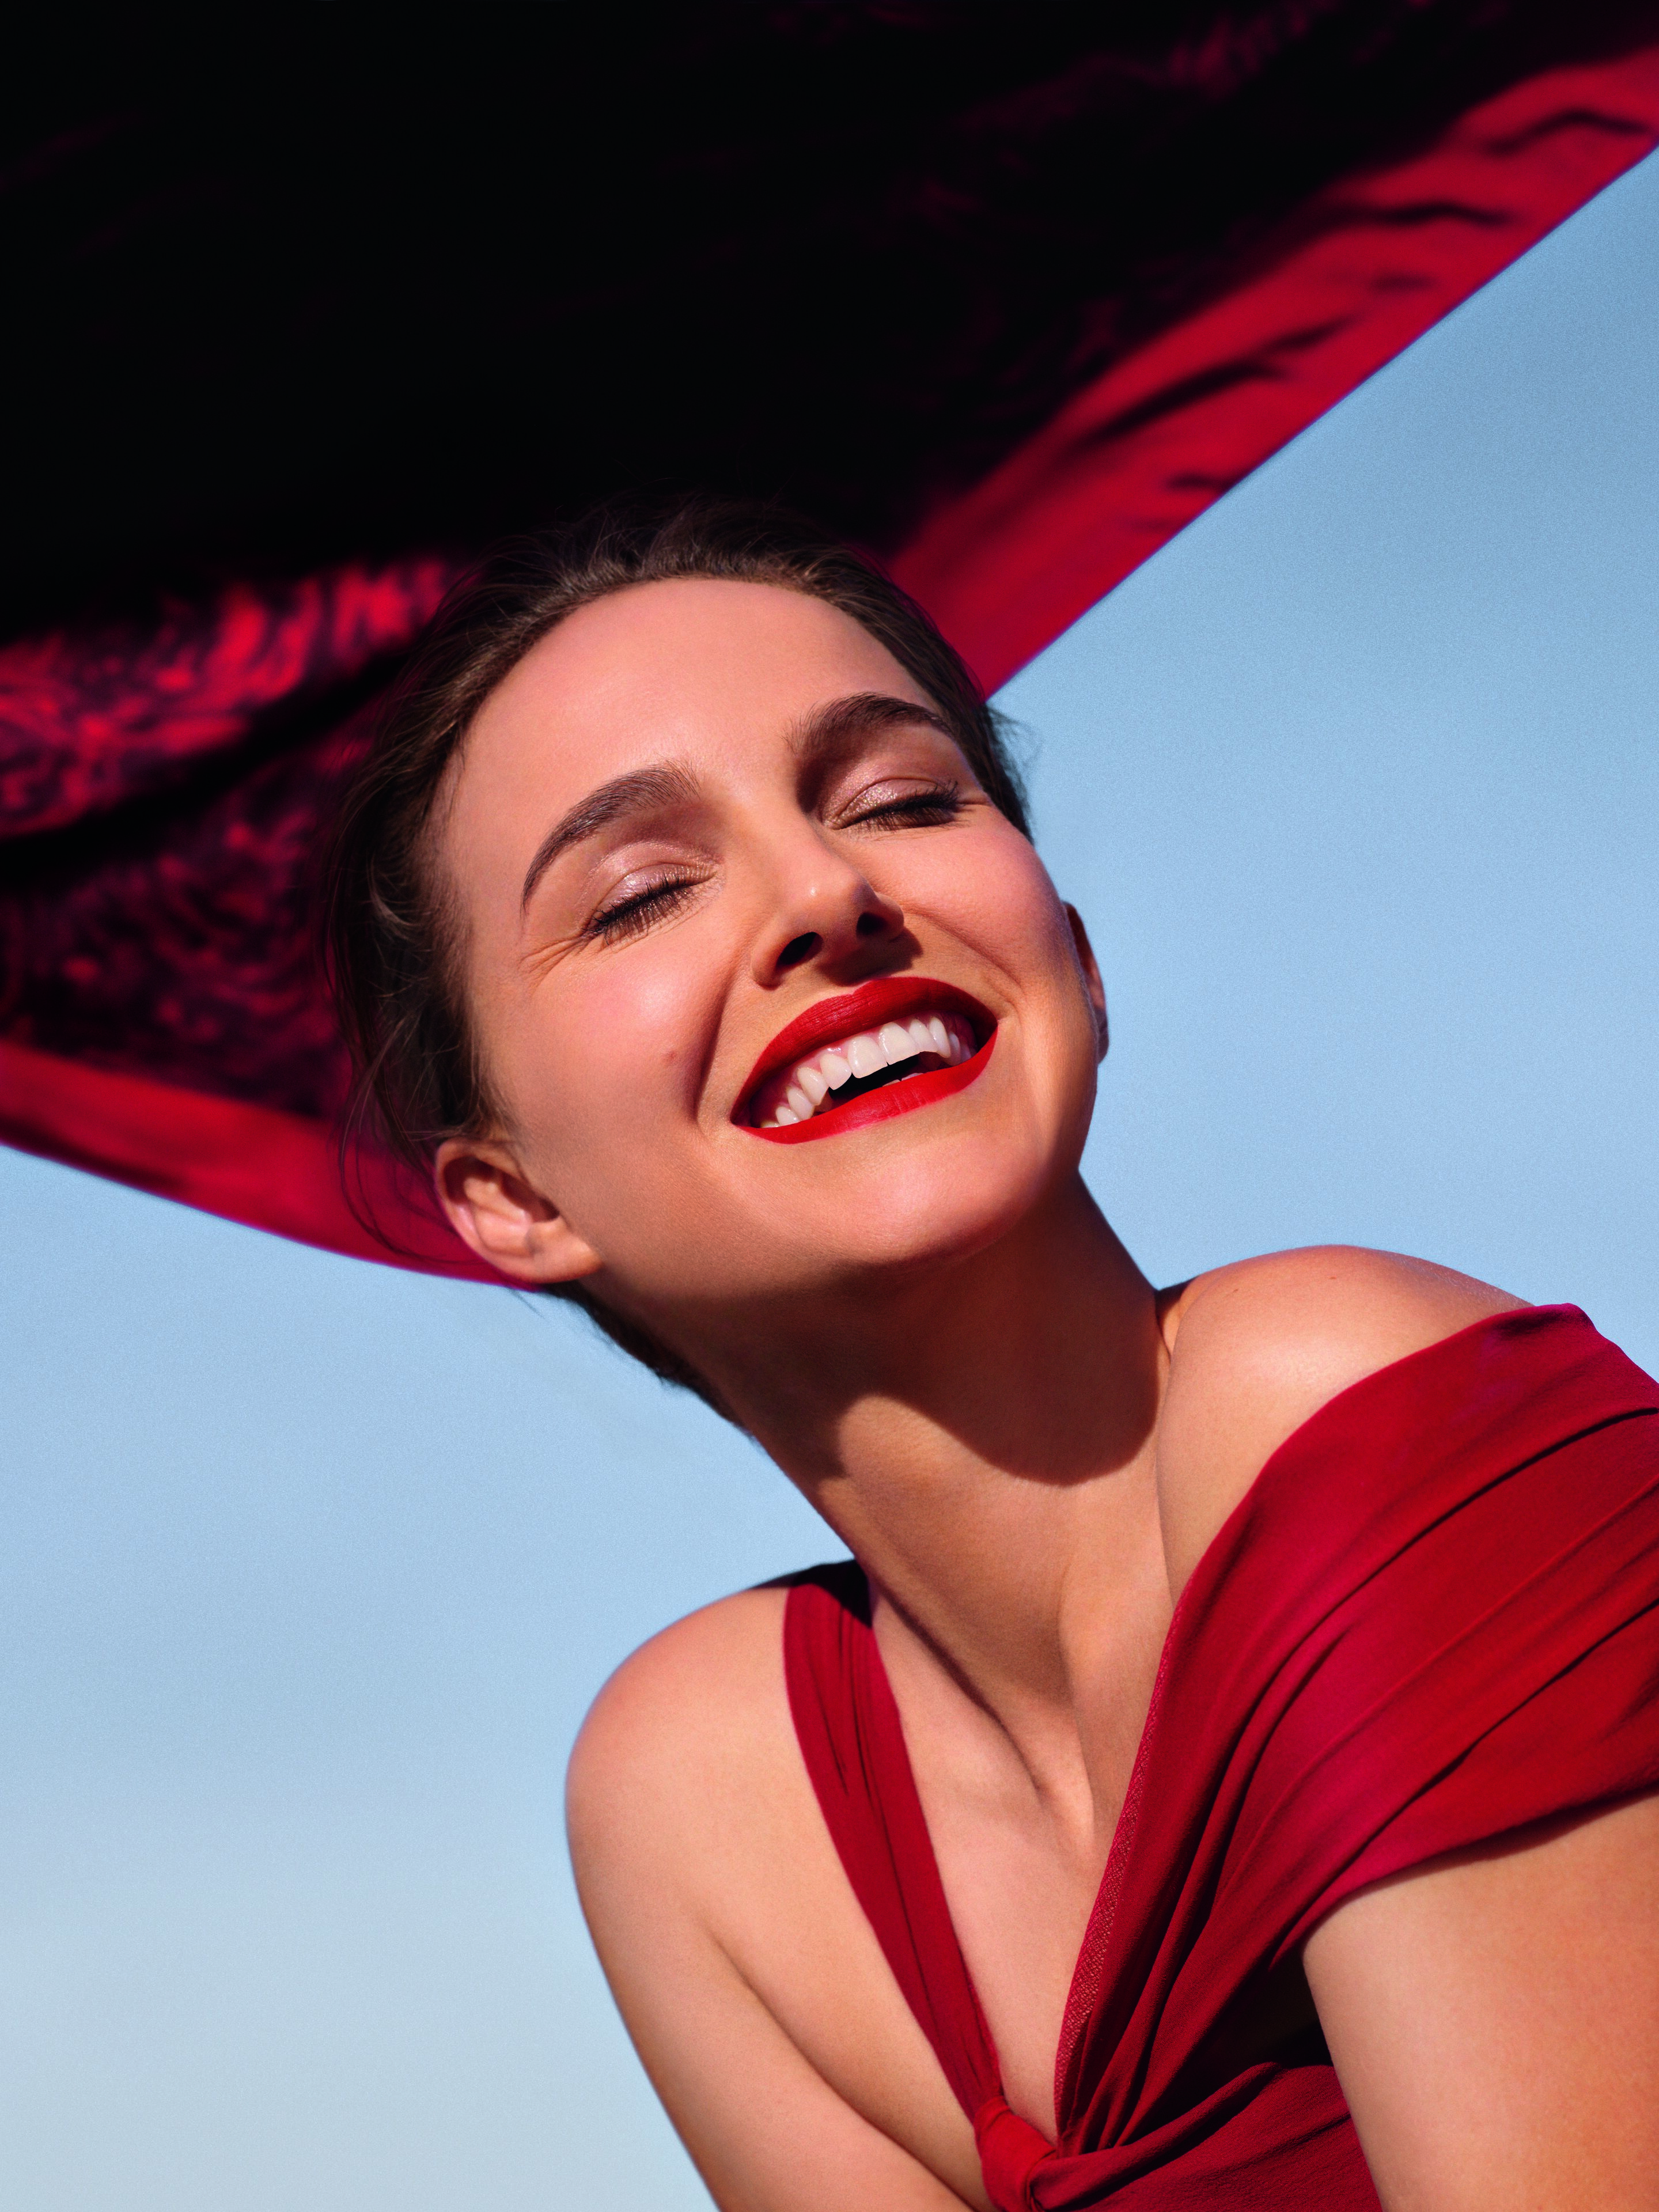 Natalie Portman on Her Favorite Dior Lipstick and Returning to Thor